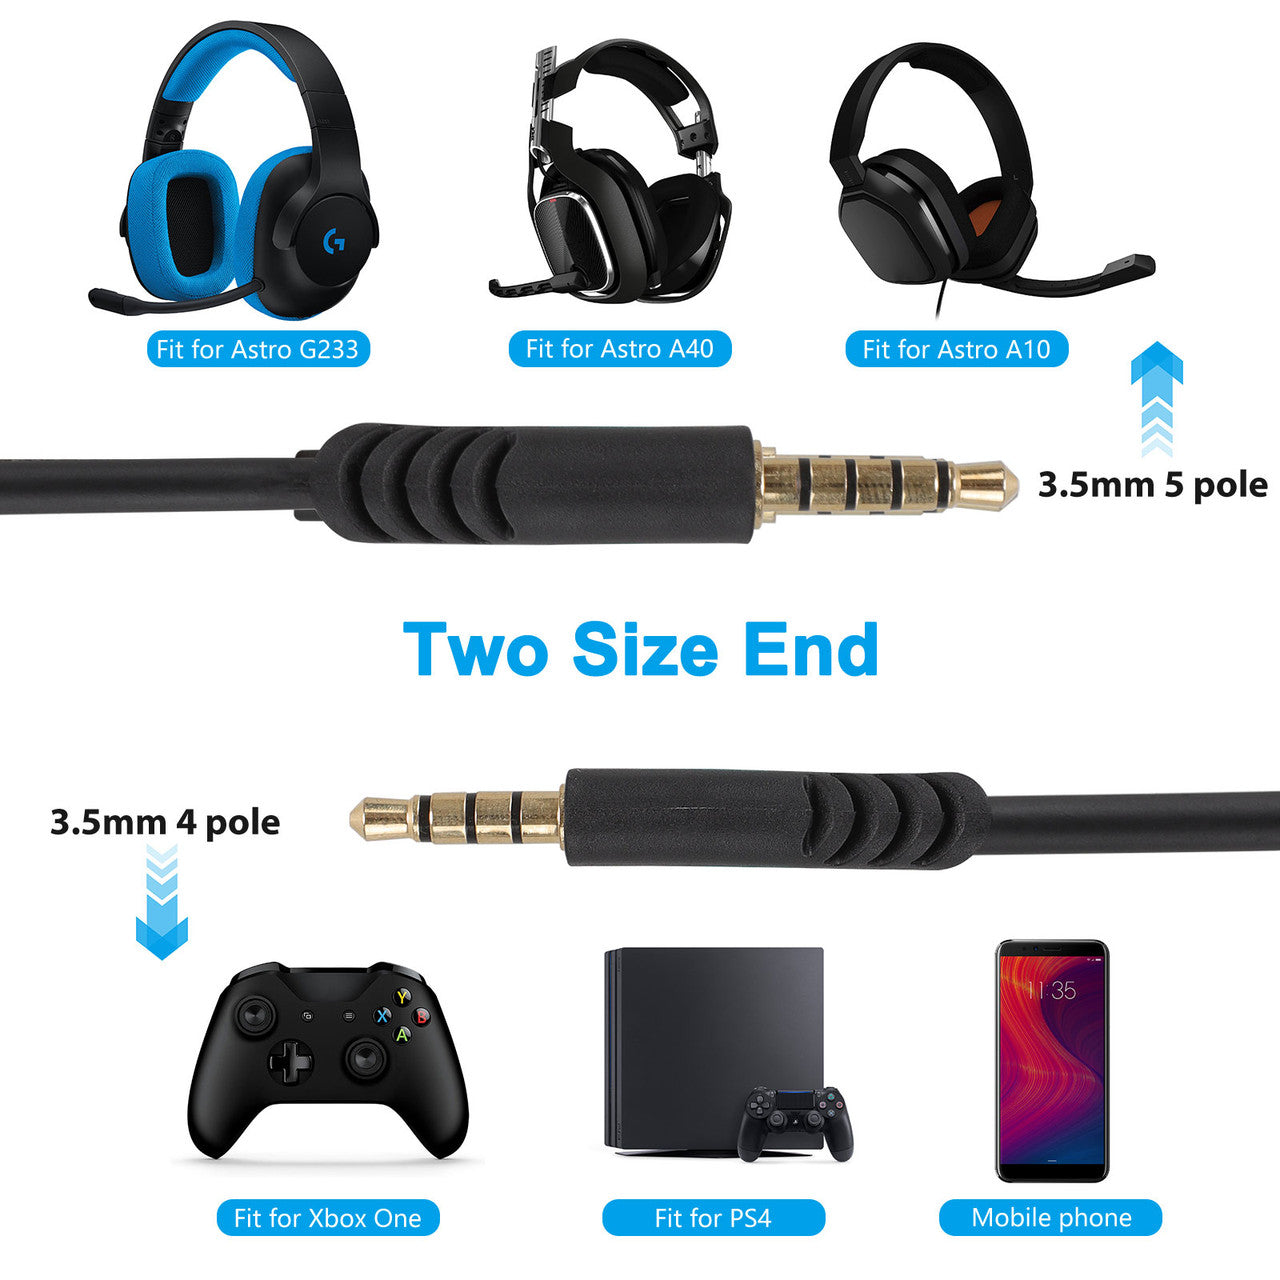 Replacement Audio Chat Talkback Cable Cord with Mute Function Fit for Astro A10 A40 G233 G433 Gaming Headset, etc